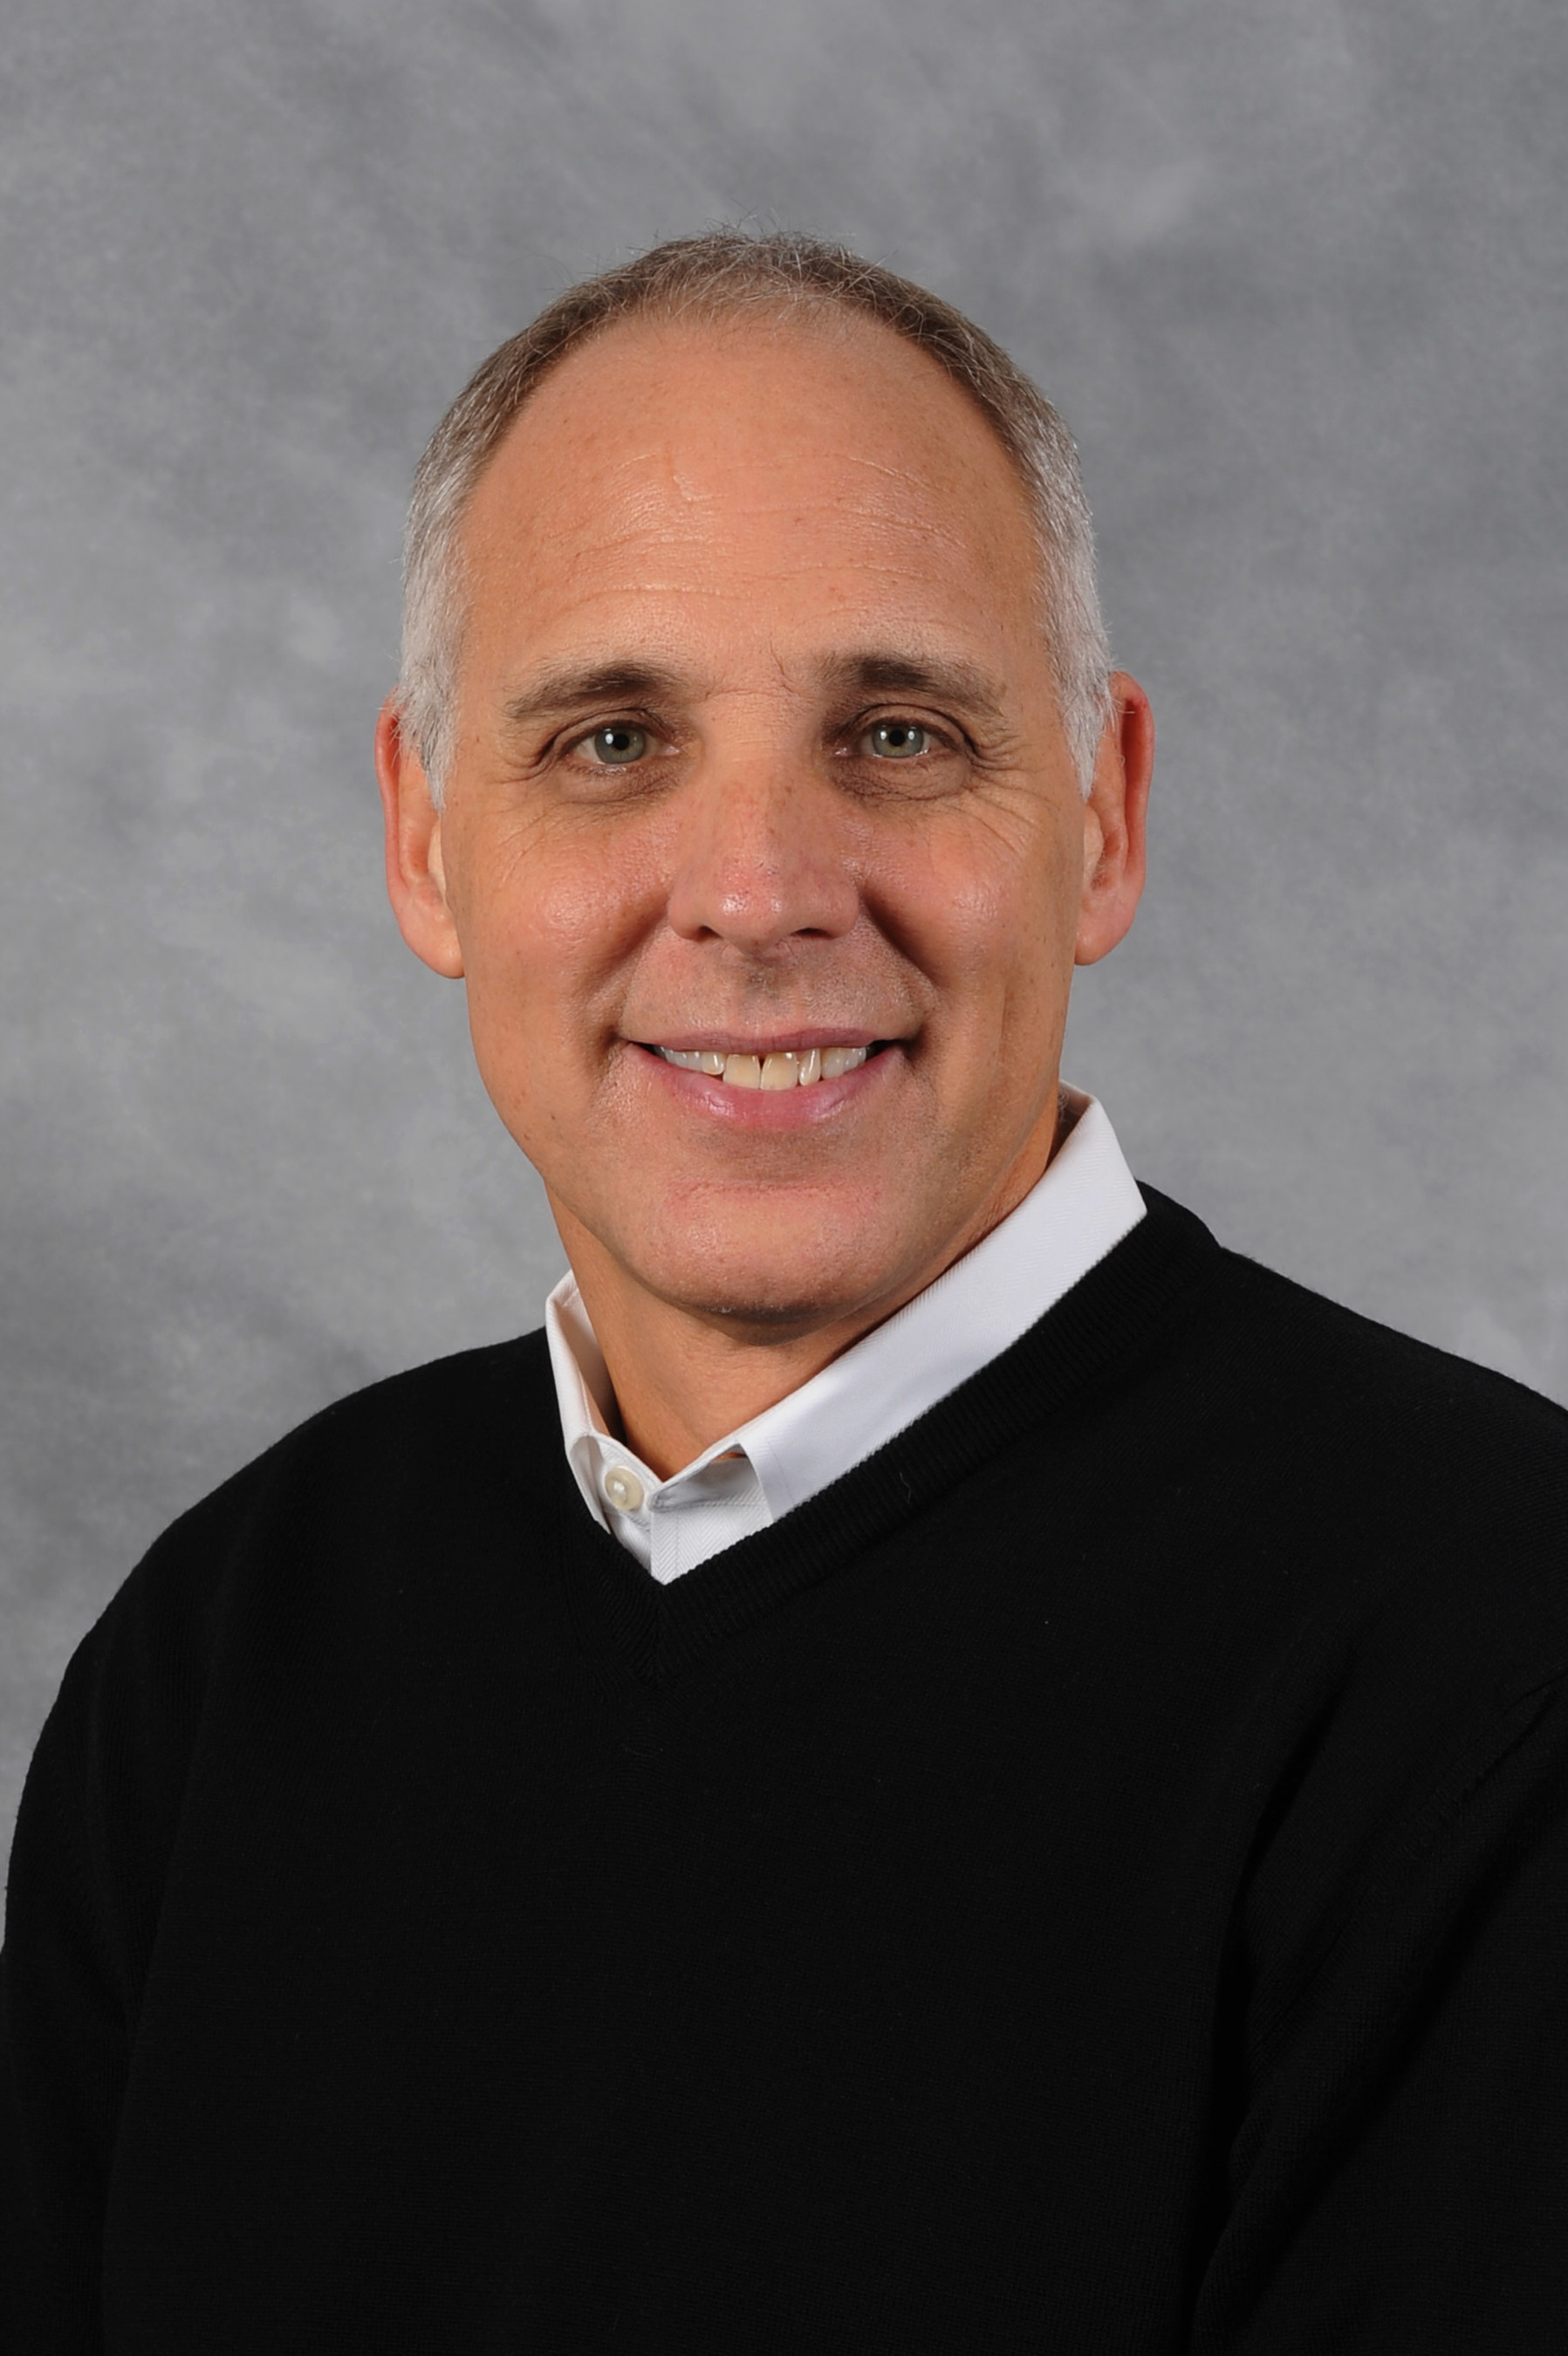 Chuck Paschke was named Senior Director of Organizational Health. Paschke has been with Galderma more than 18 years and most recently served as Galderma's Senior Director Leadership, Commercial Excellence.